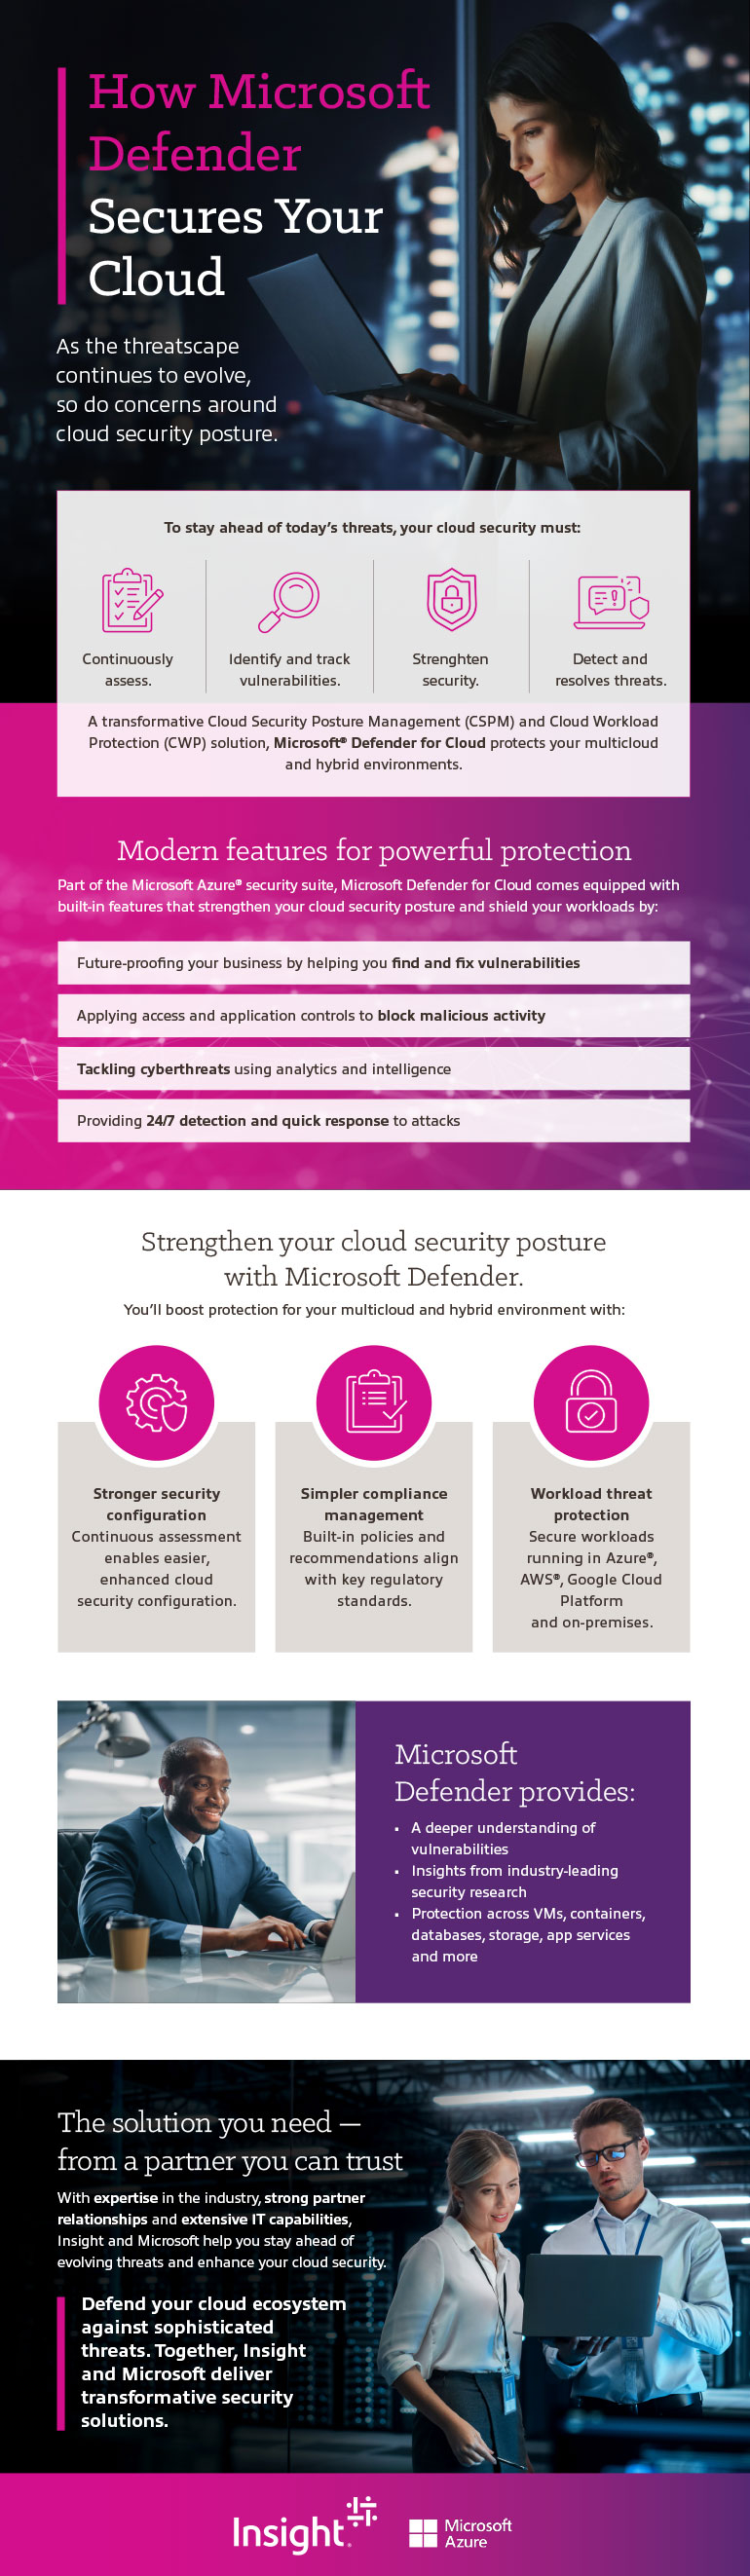 How Microsoft Defender Secures Your Cloud infographic